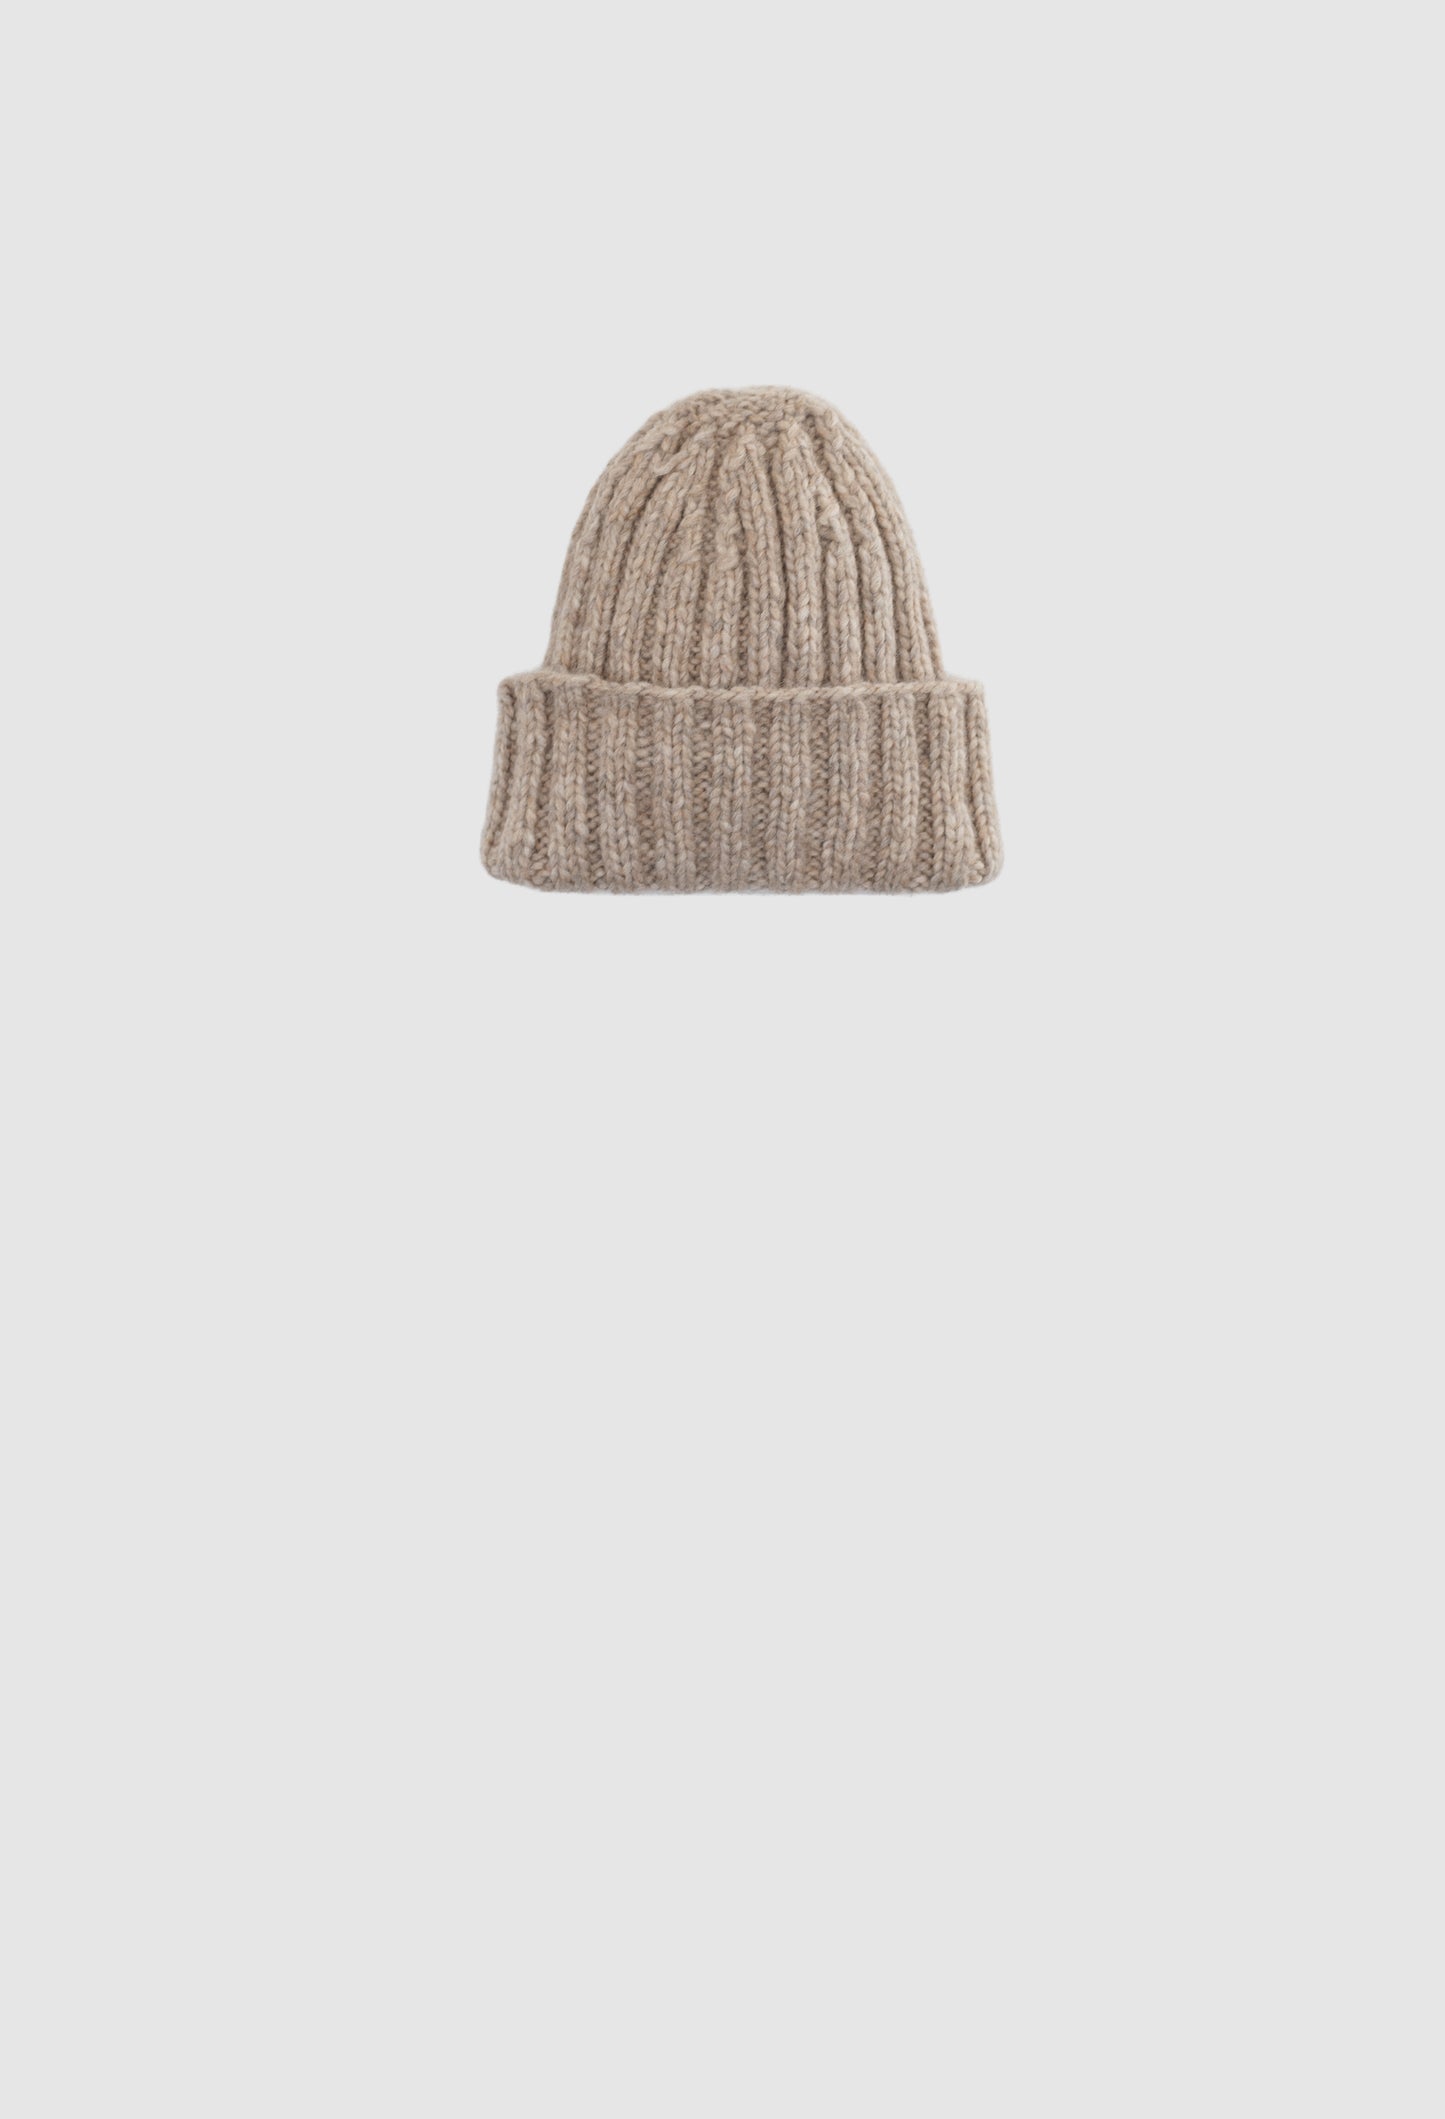 ELM Hat - Alpaca Hand-Knit Single Layered Ribbed Hat in Beige